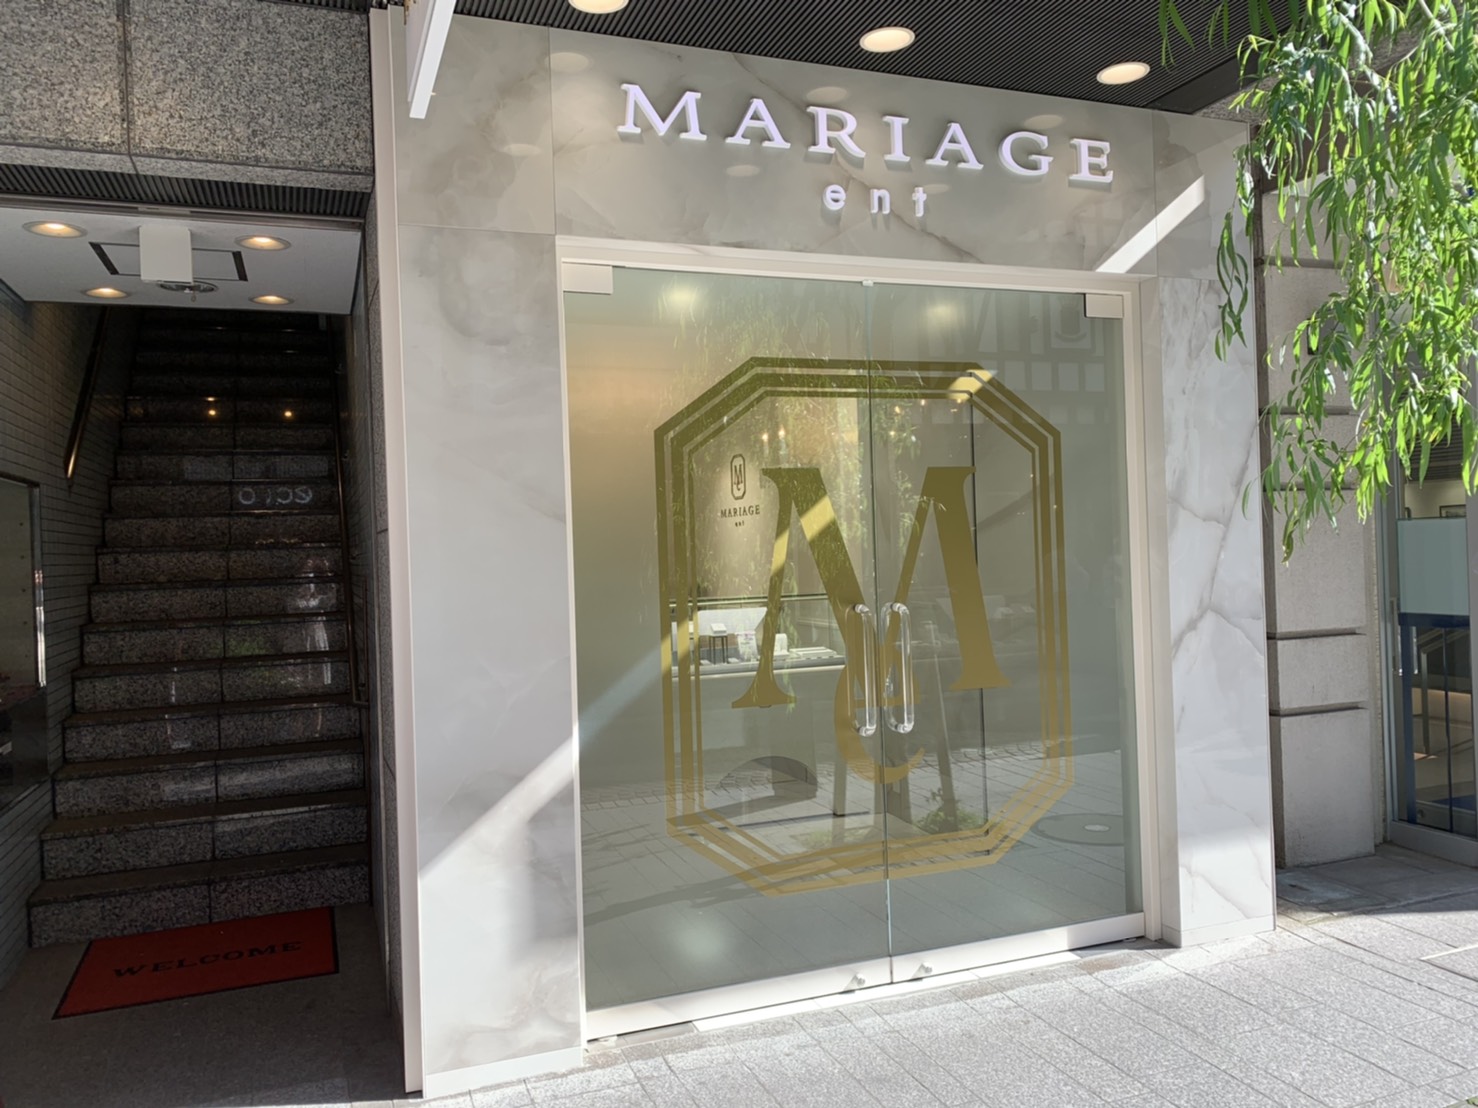 Mariage ent横滨元町总店